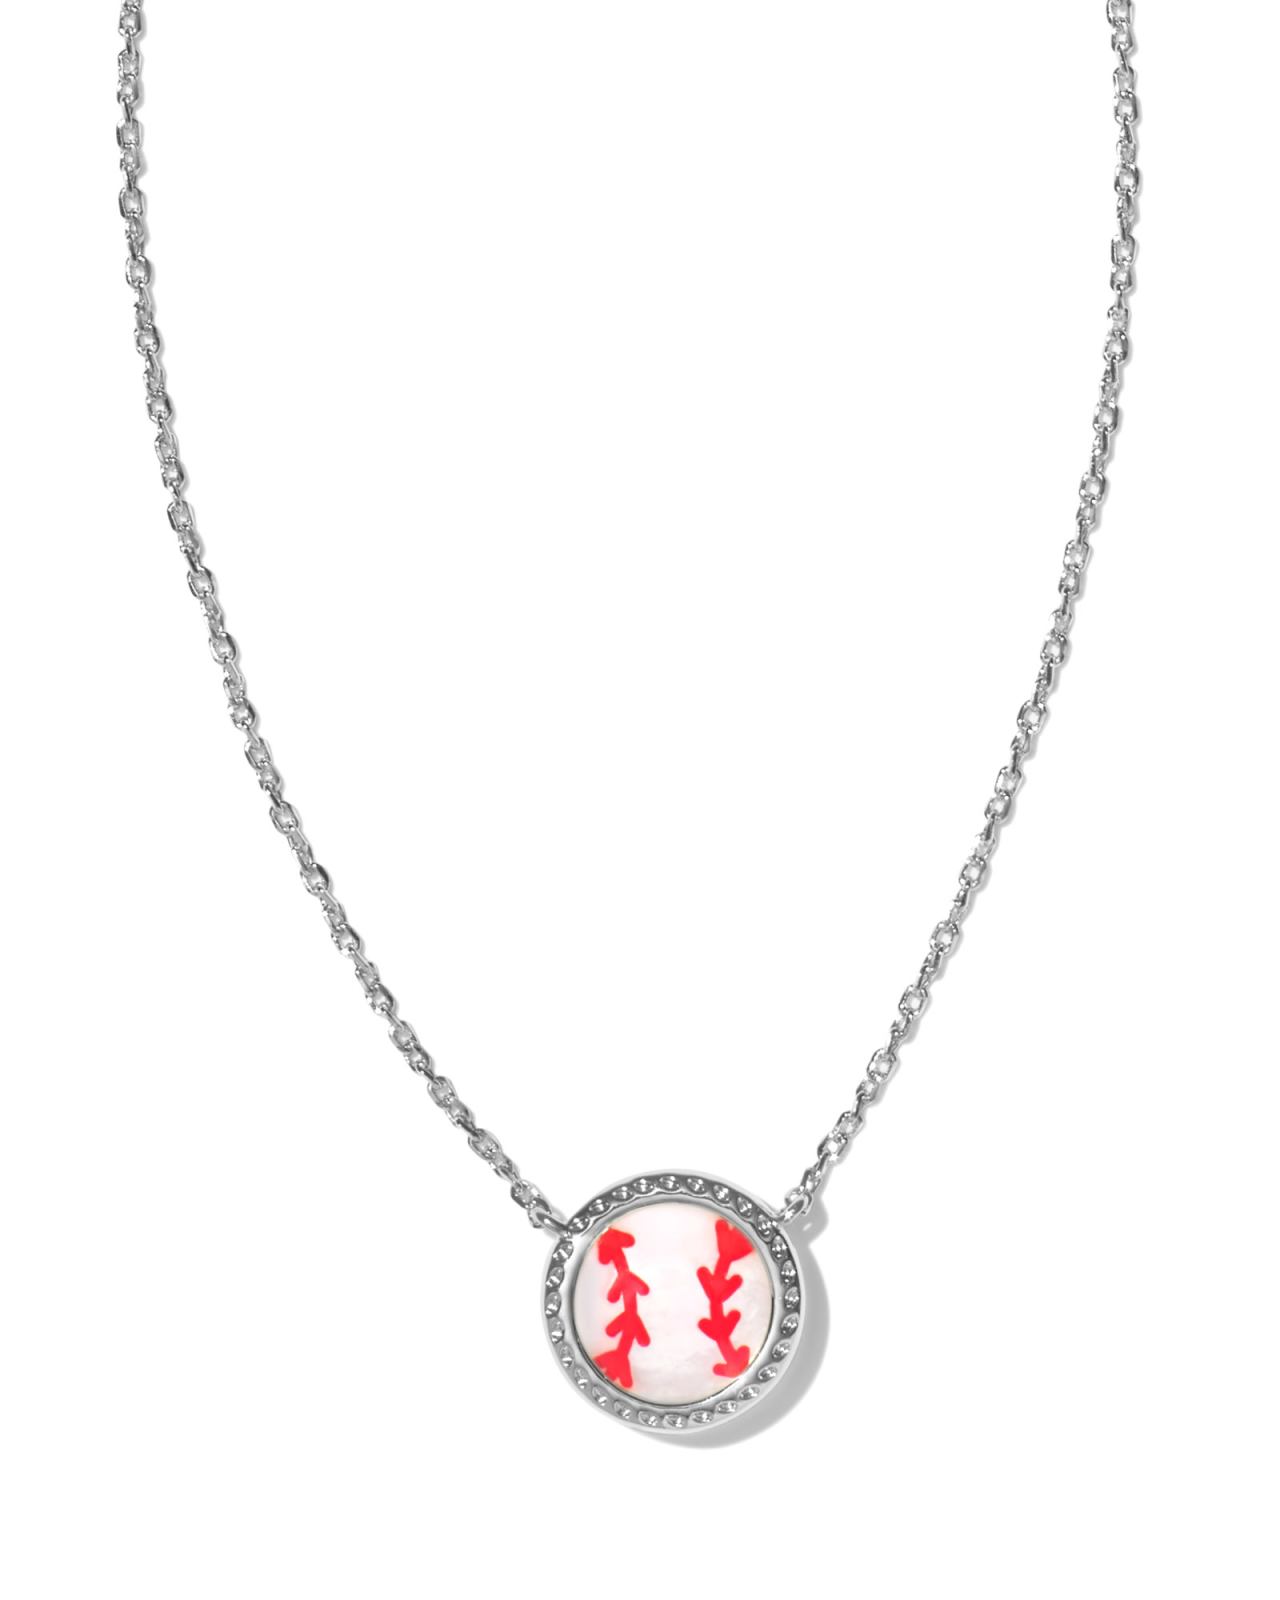 Baseball Silver Short Pendant Necklace in Ivory Mother-of-Pearl | Kendra Scott